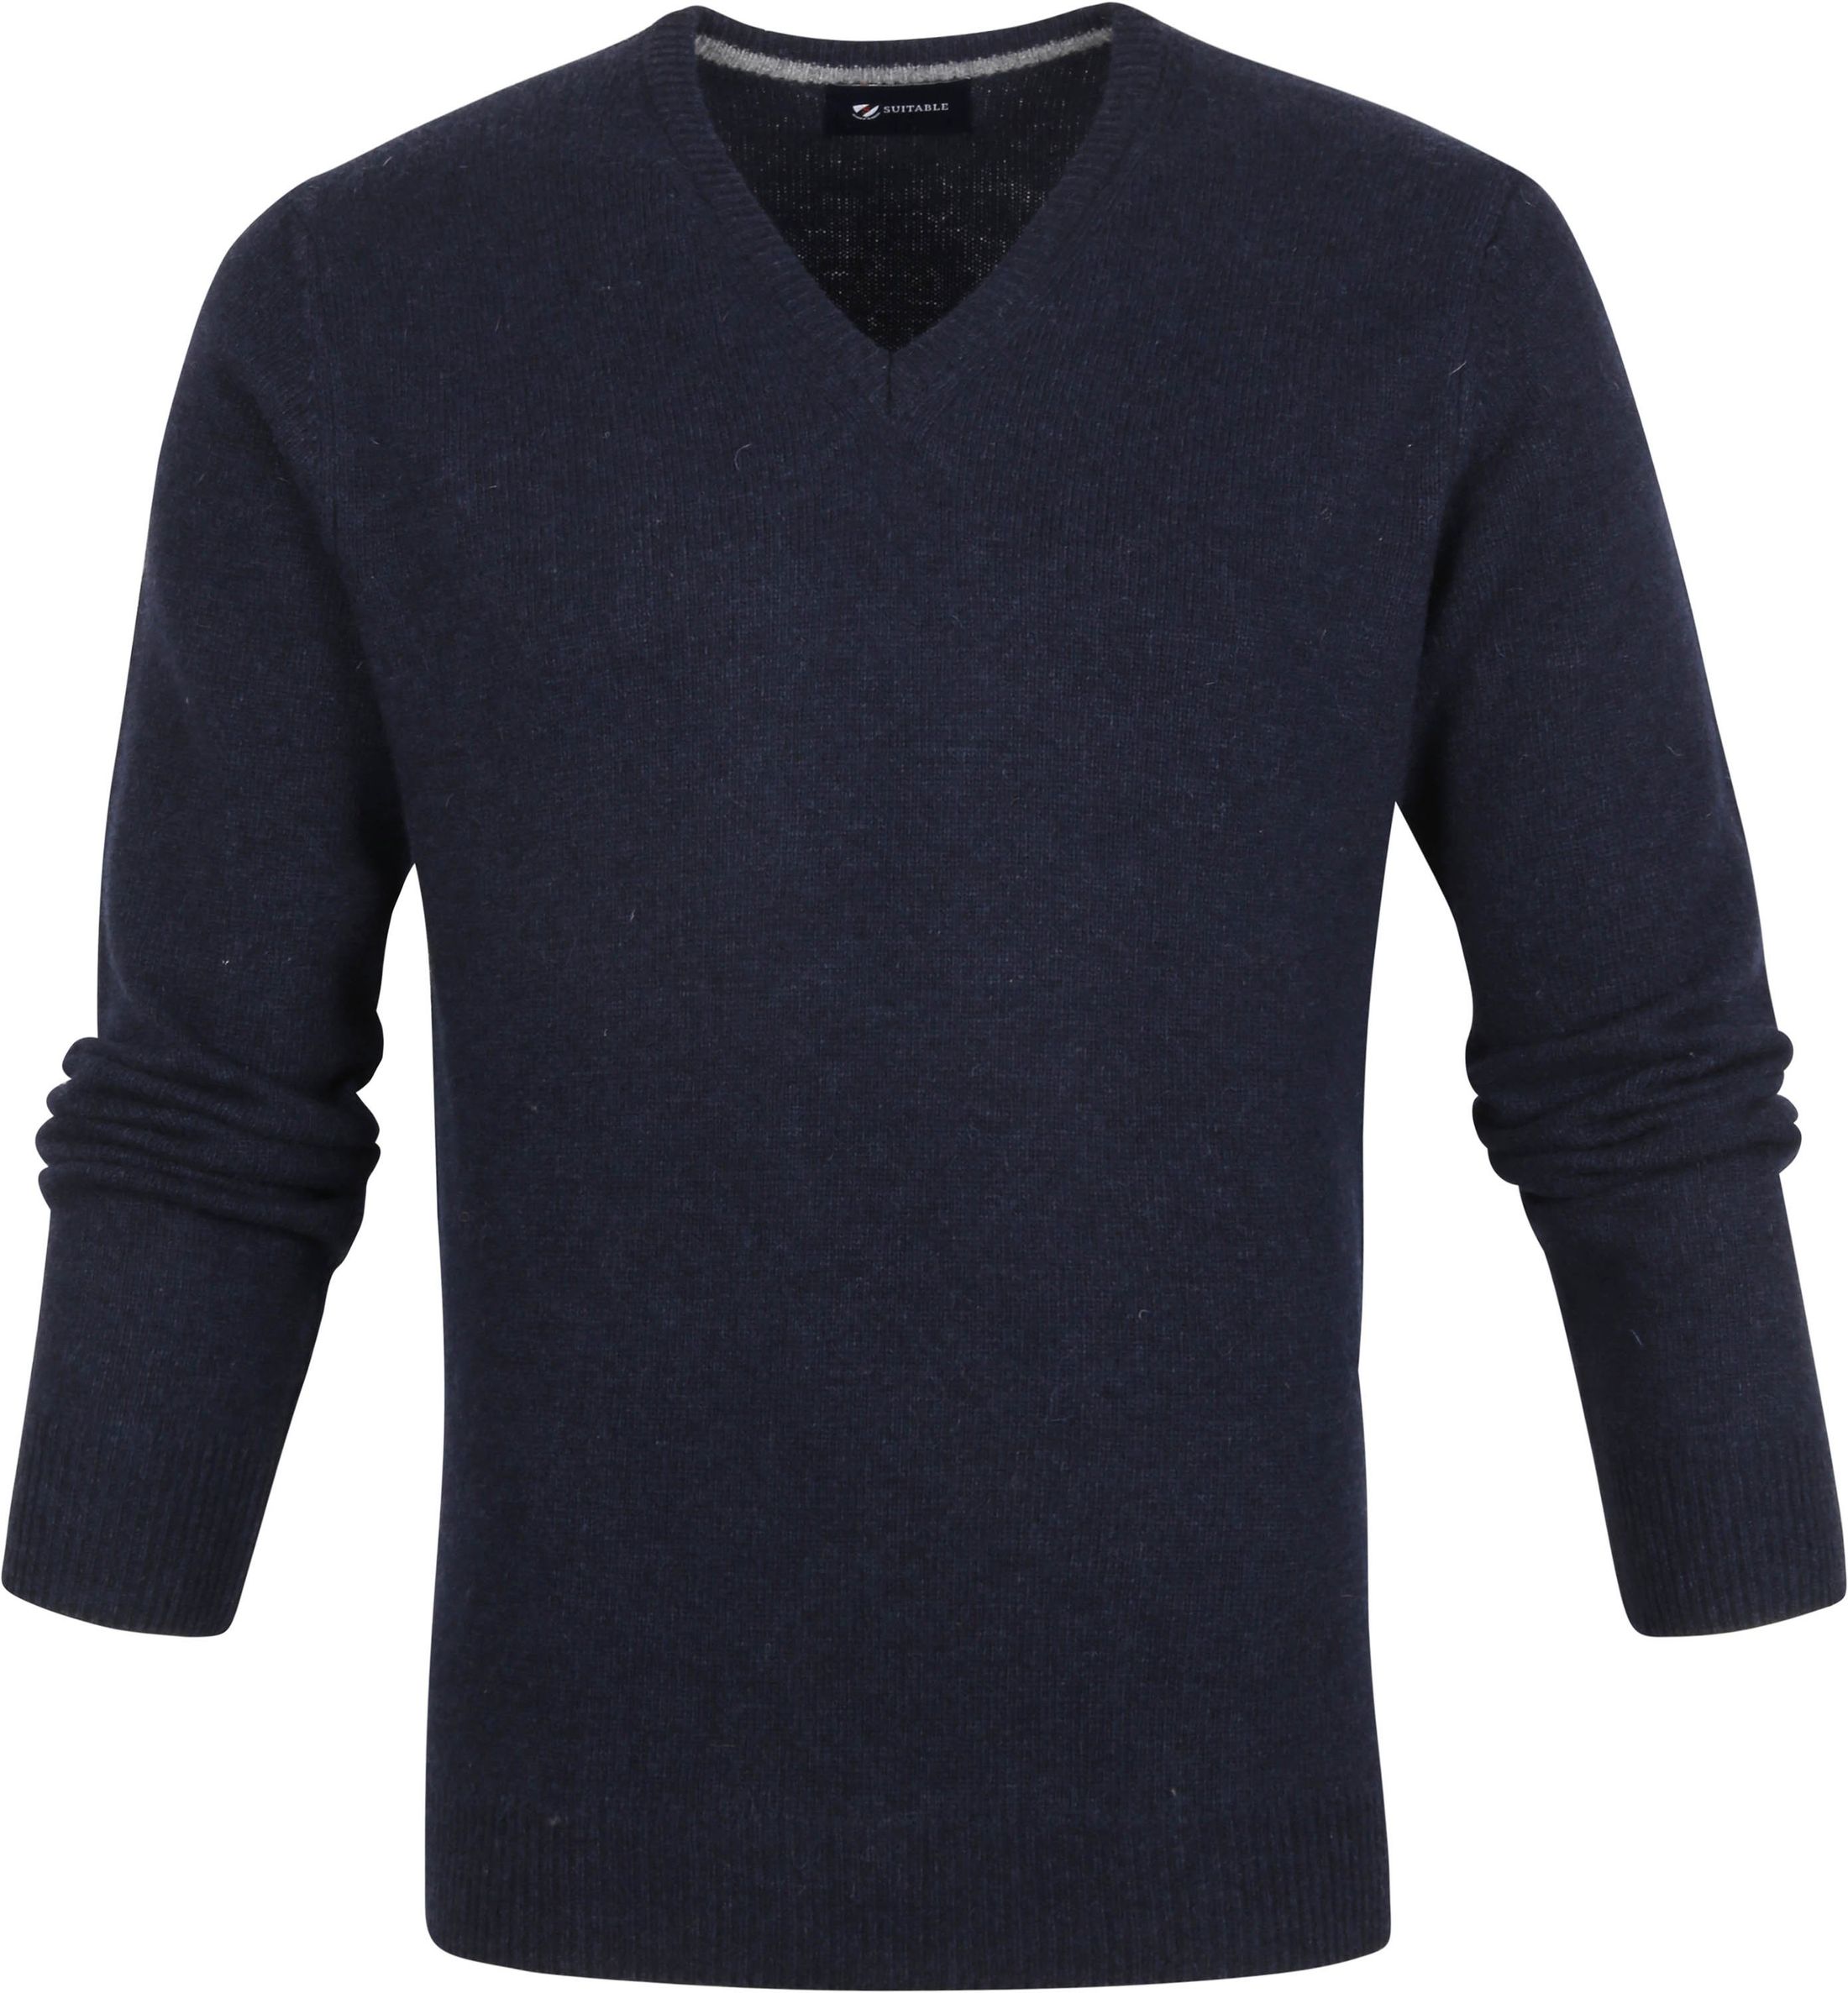 Suitable Lambswool Pullover V-Neck Navy Blue Dark Blue size M